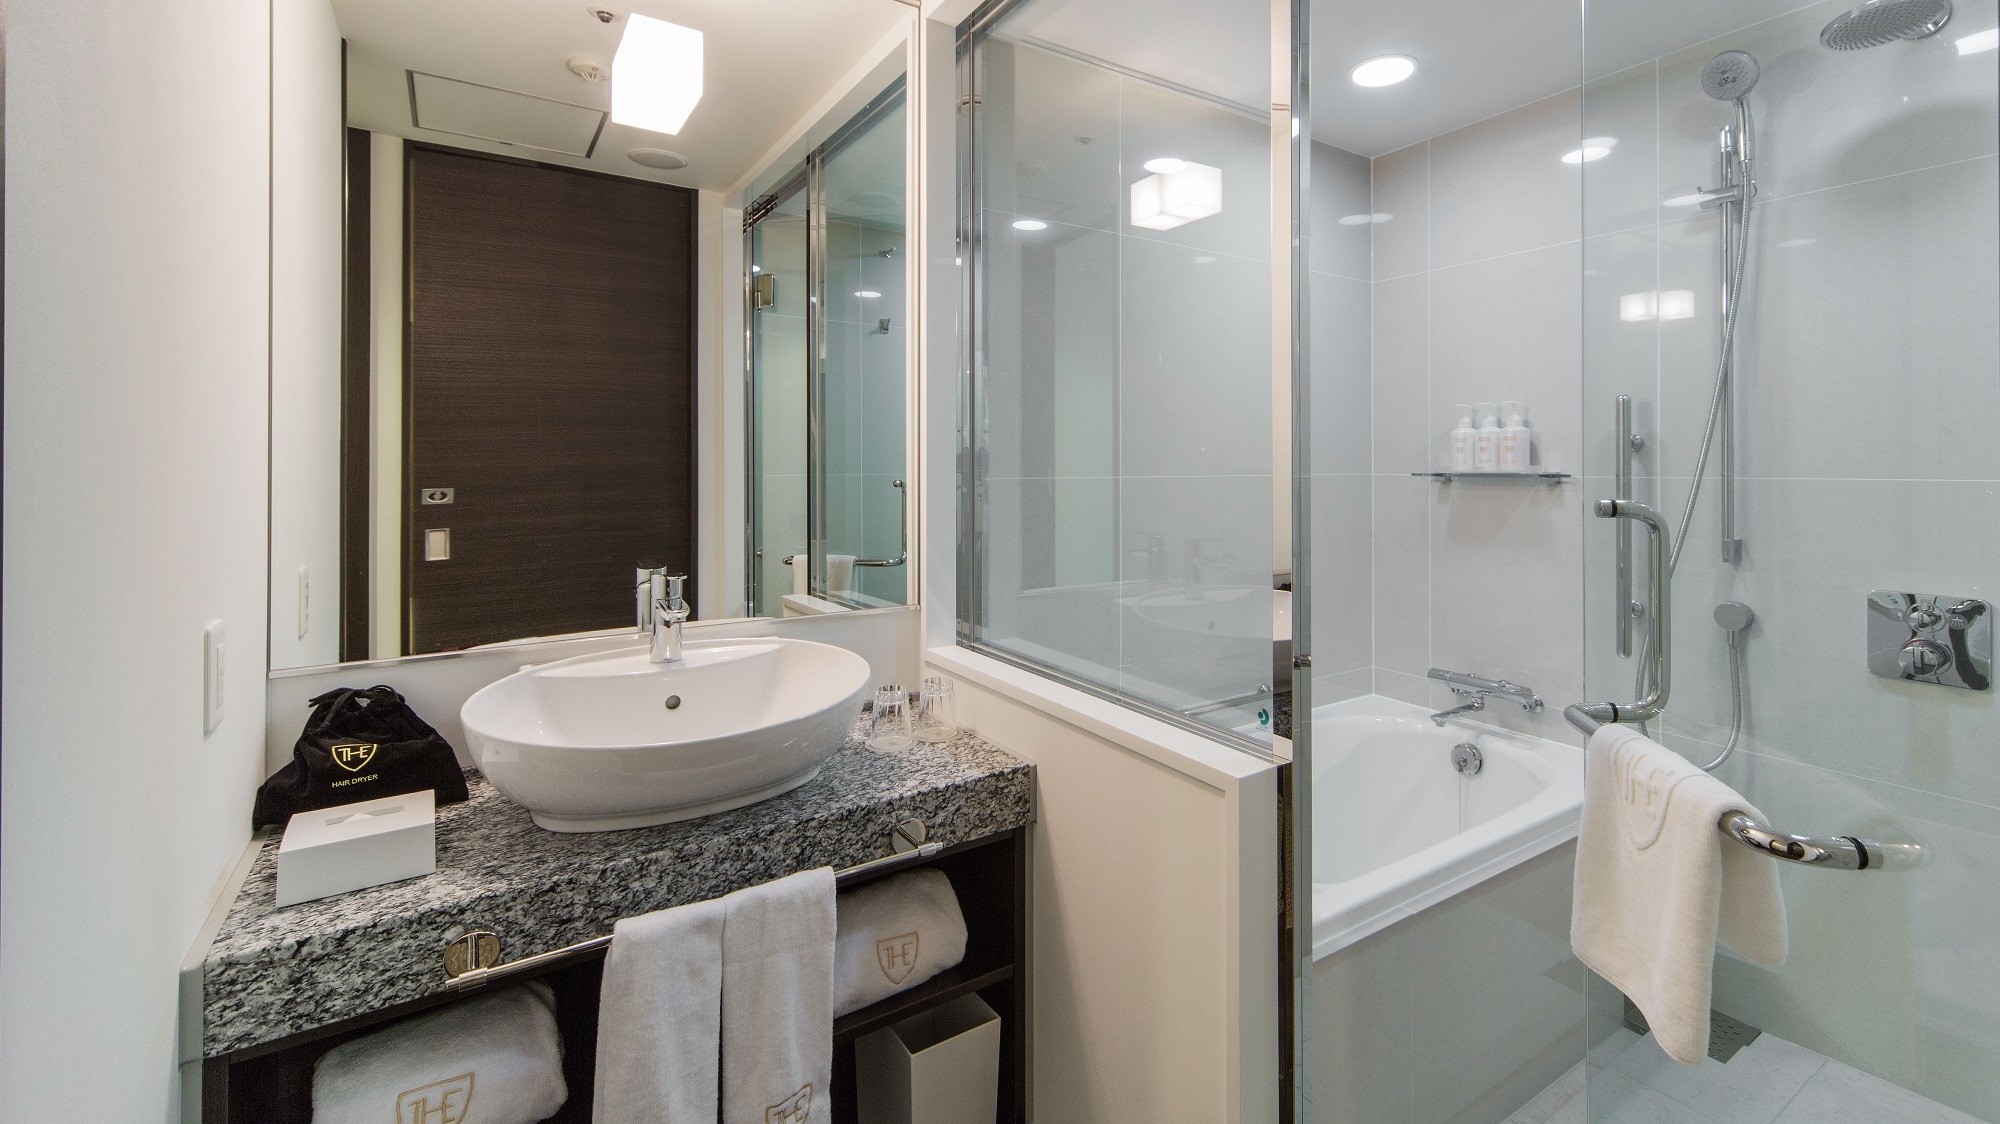 ◆ An example of a deluxe twin bathroom